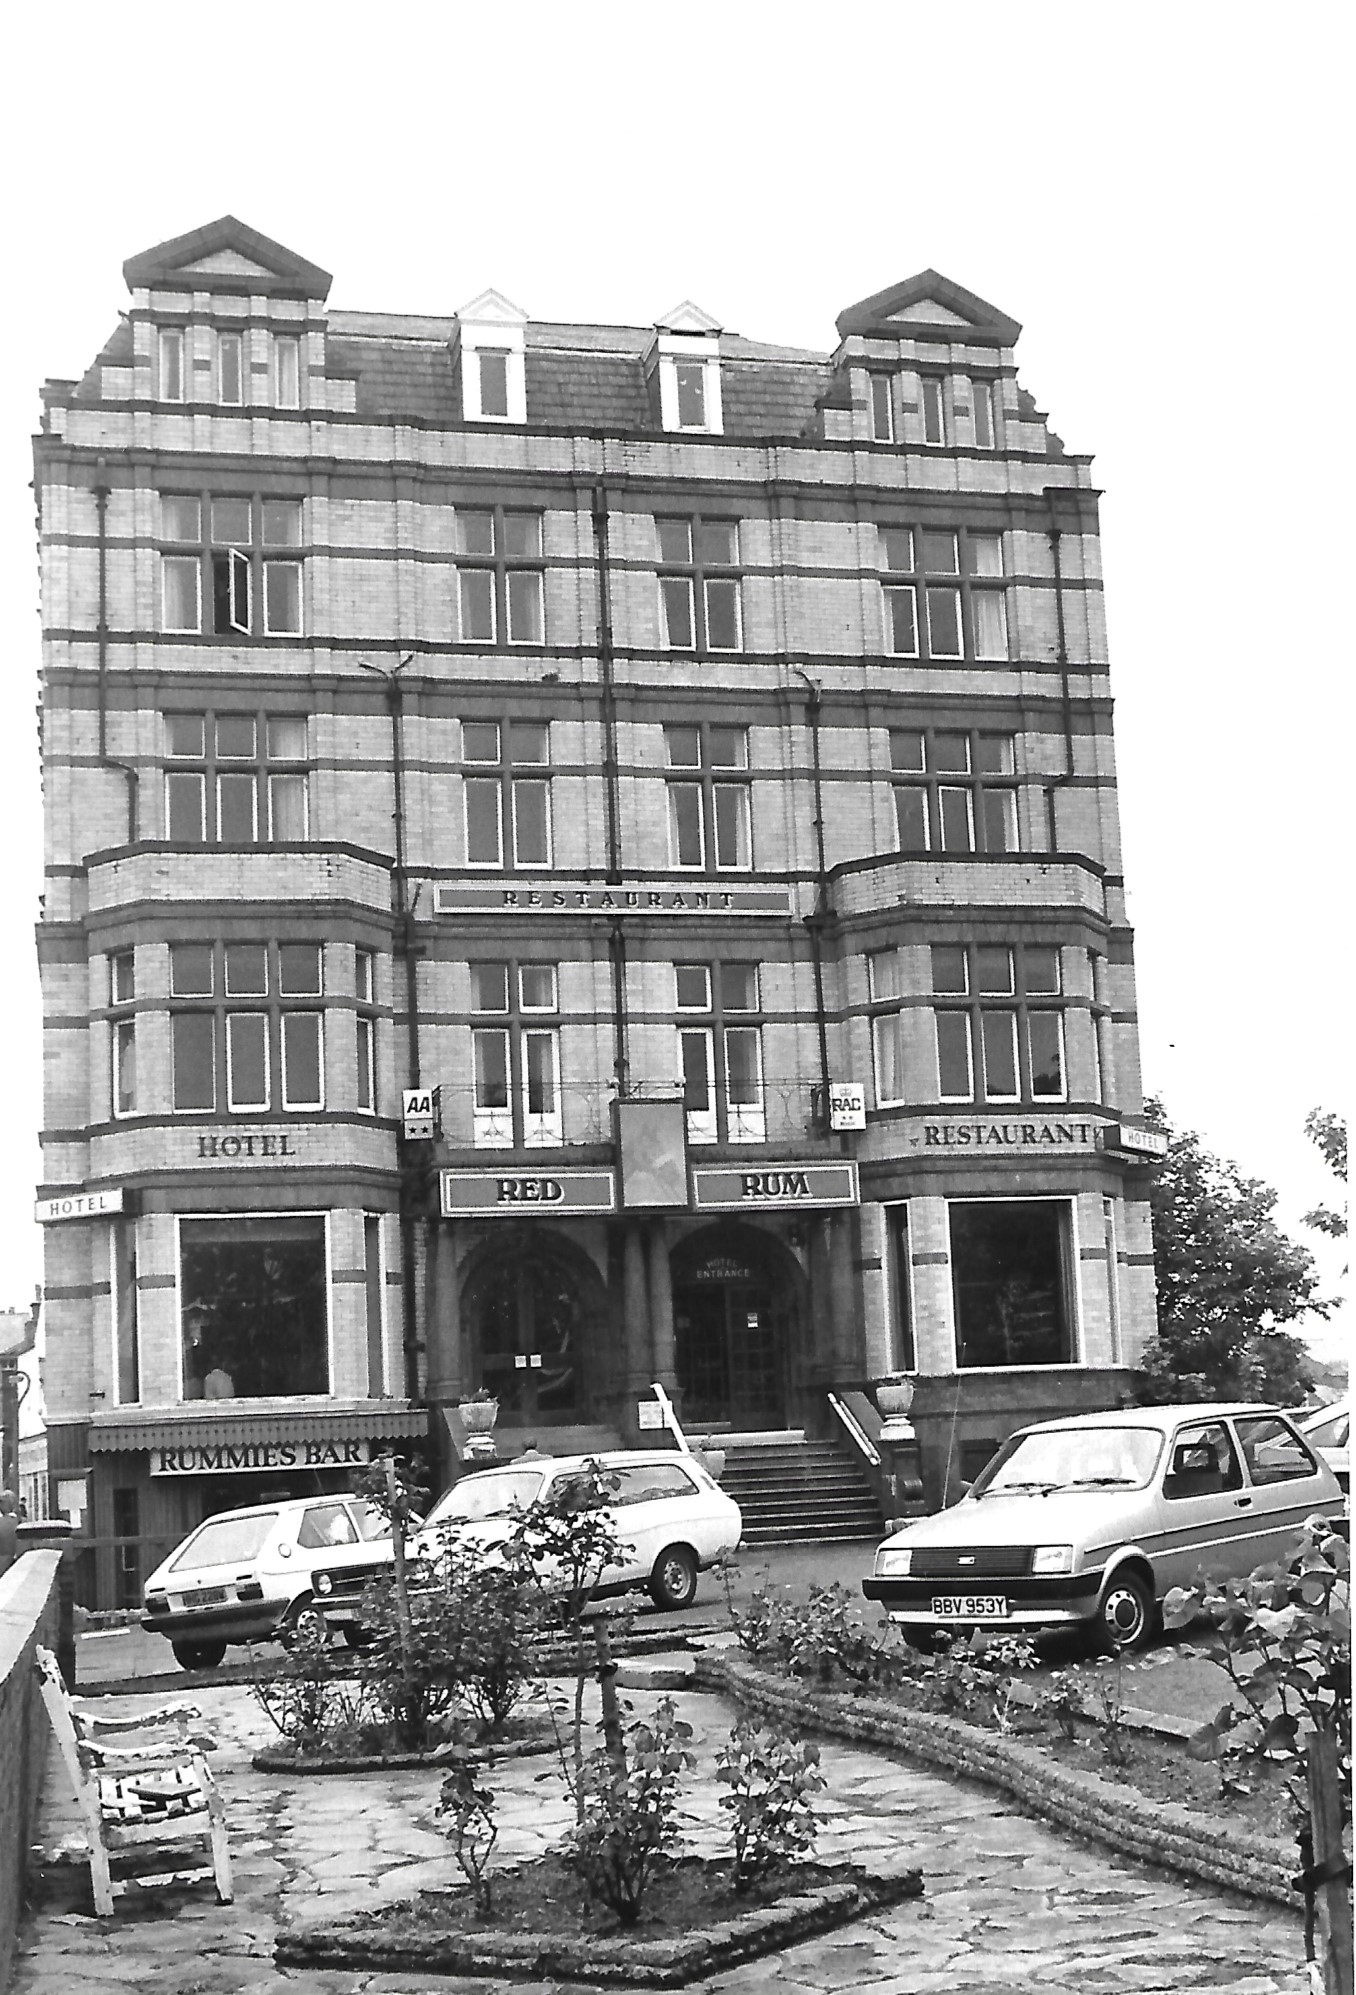 The Red Rum Hotel and Restaurant on Lord Street in Southport in the 1980s